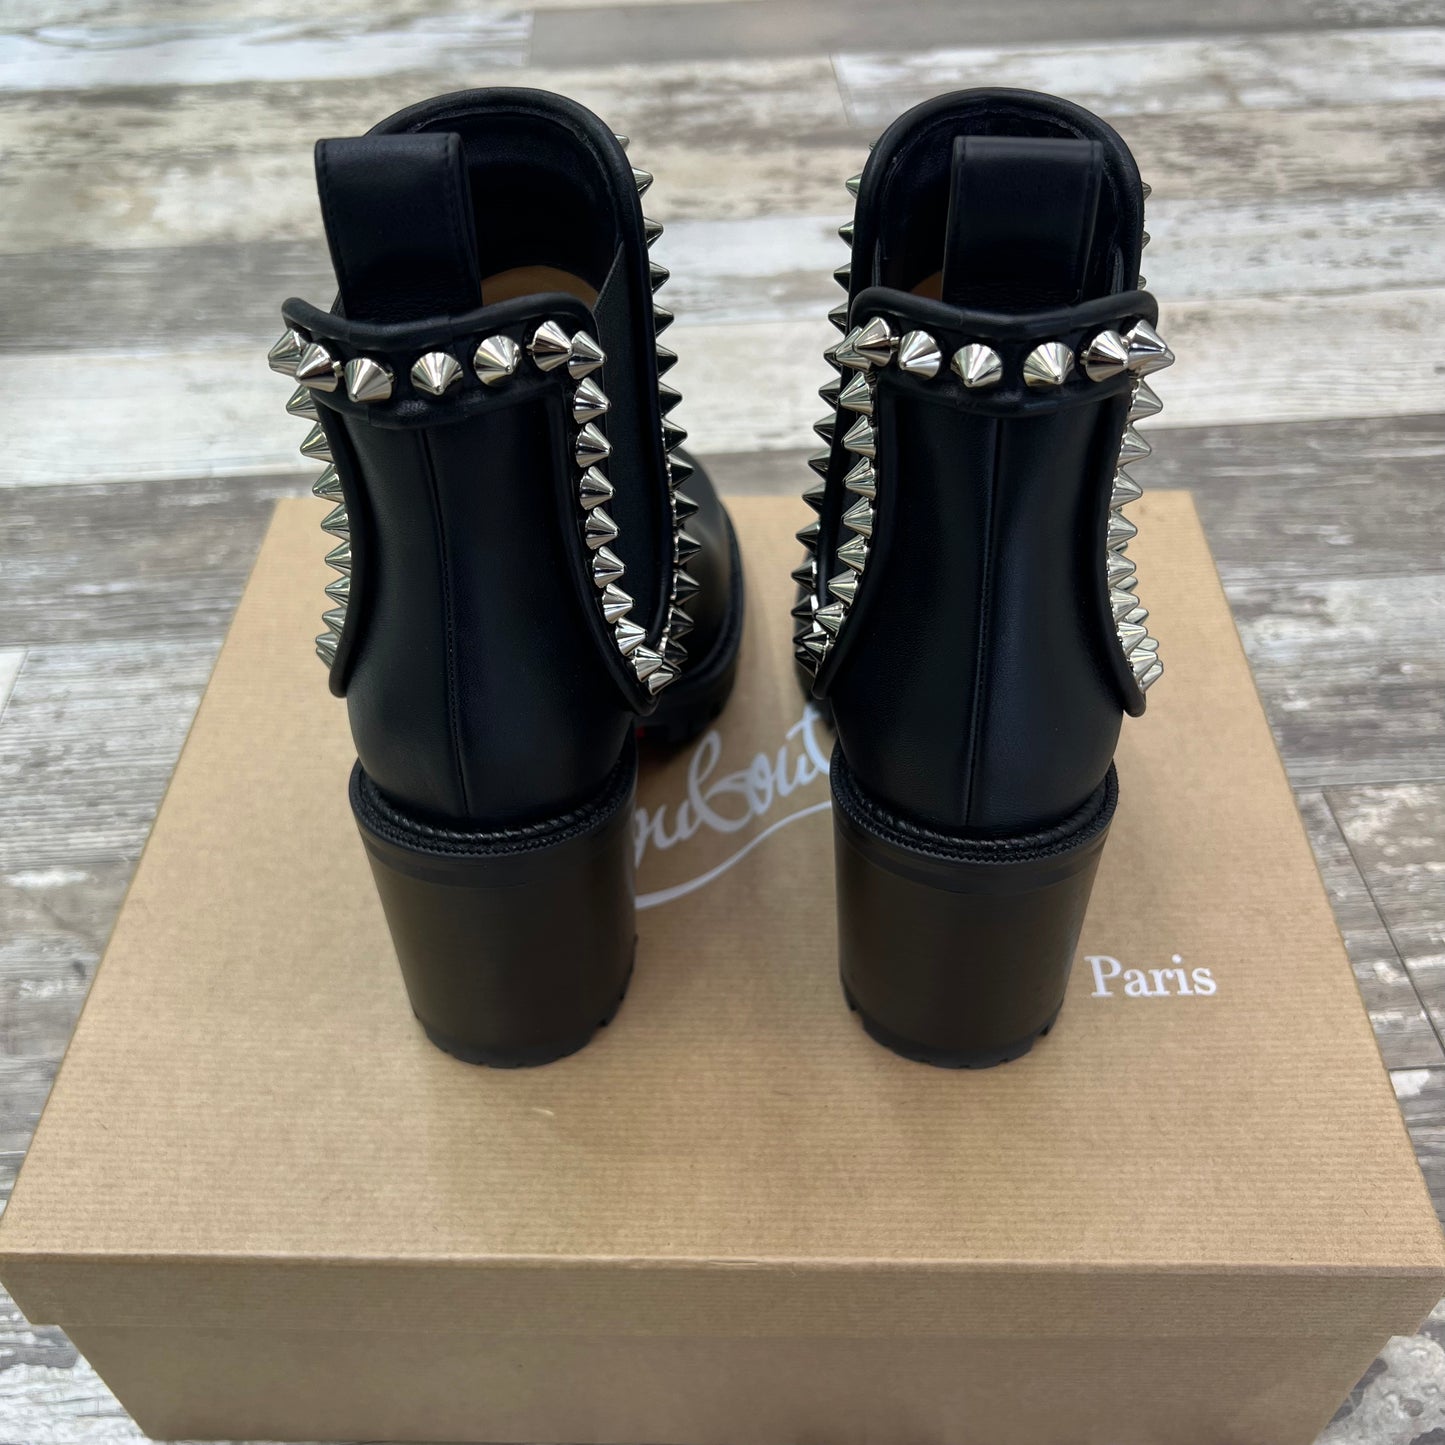 Christian Louboutin Capahutta 70mm Spiked Leather Ankle Booties, Size 35